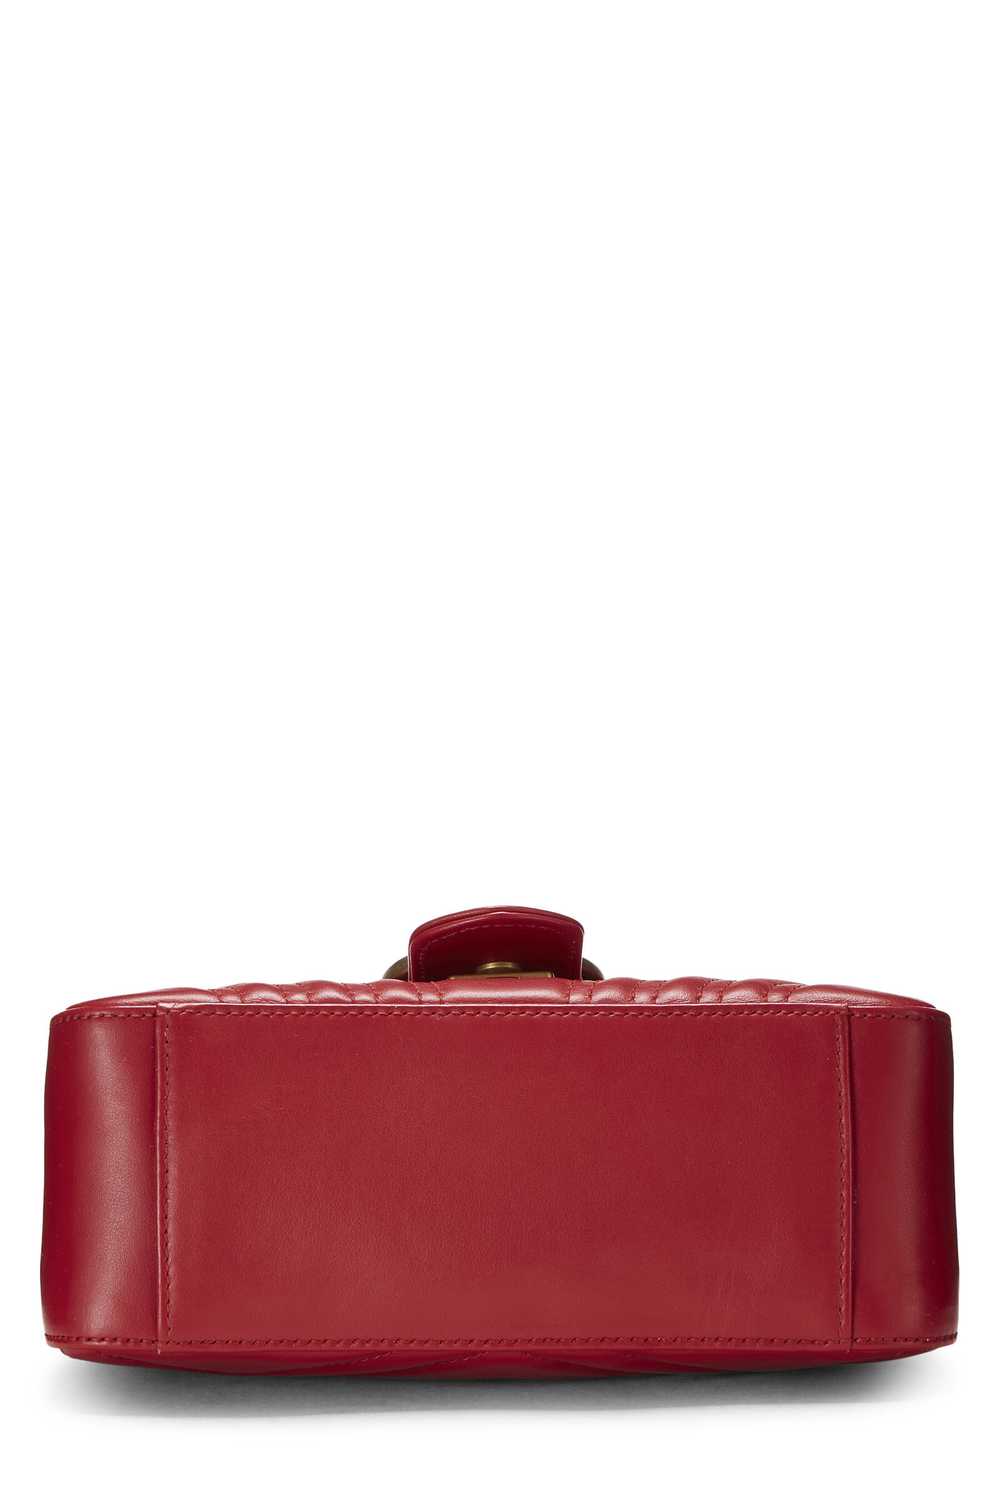 Red Leather GG Marmont Top Handle Bag Mini - image 5